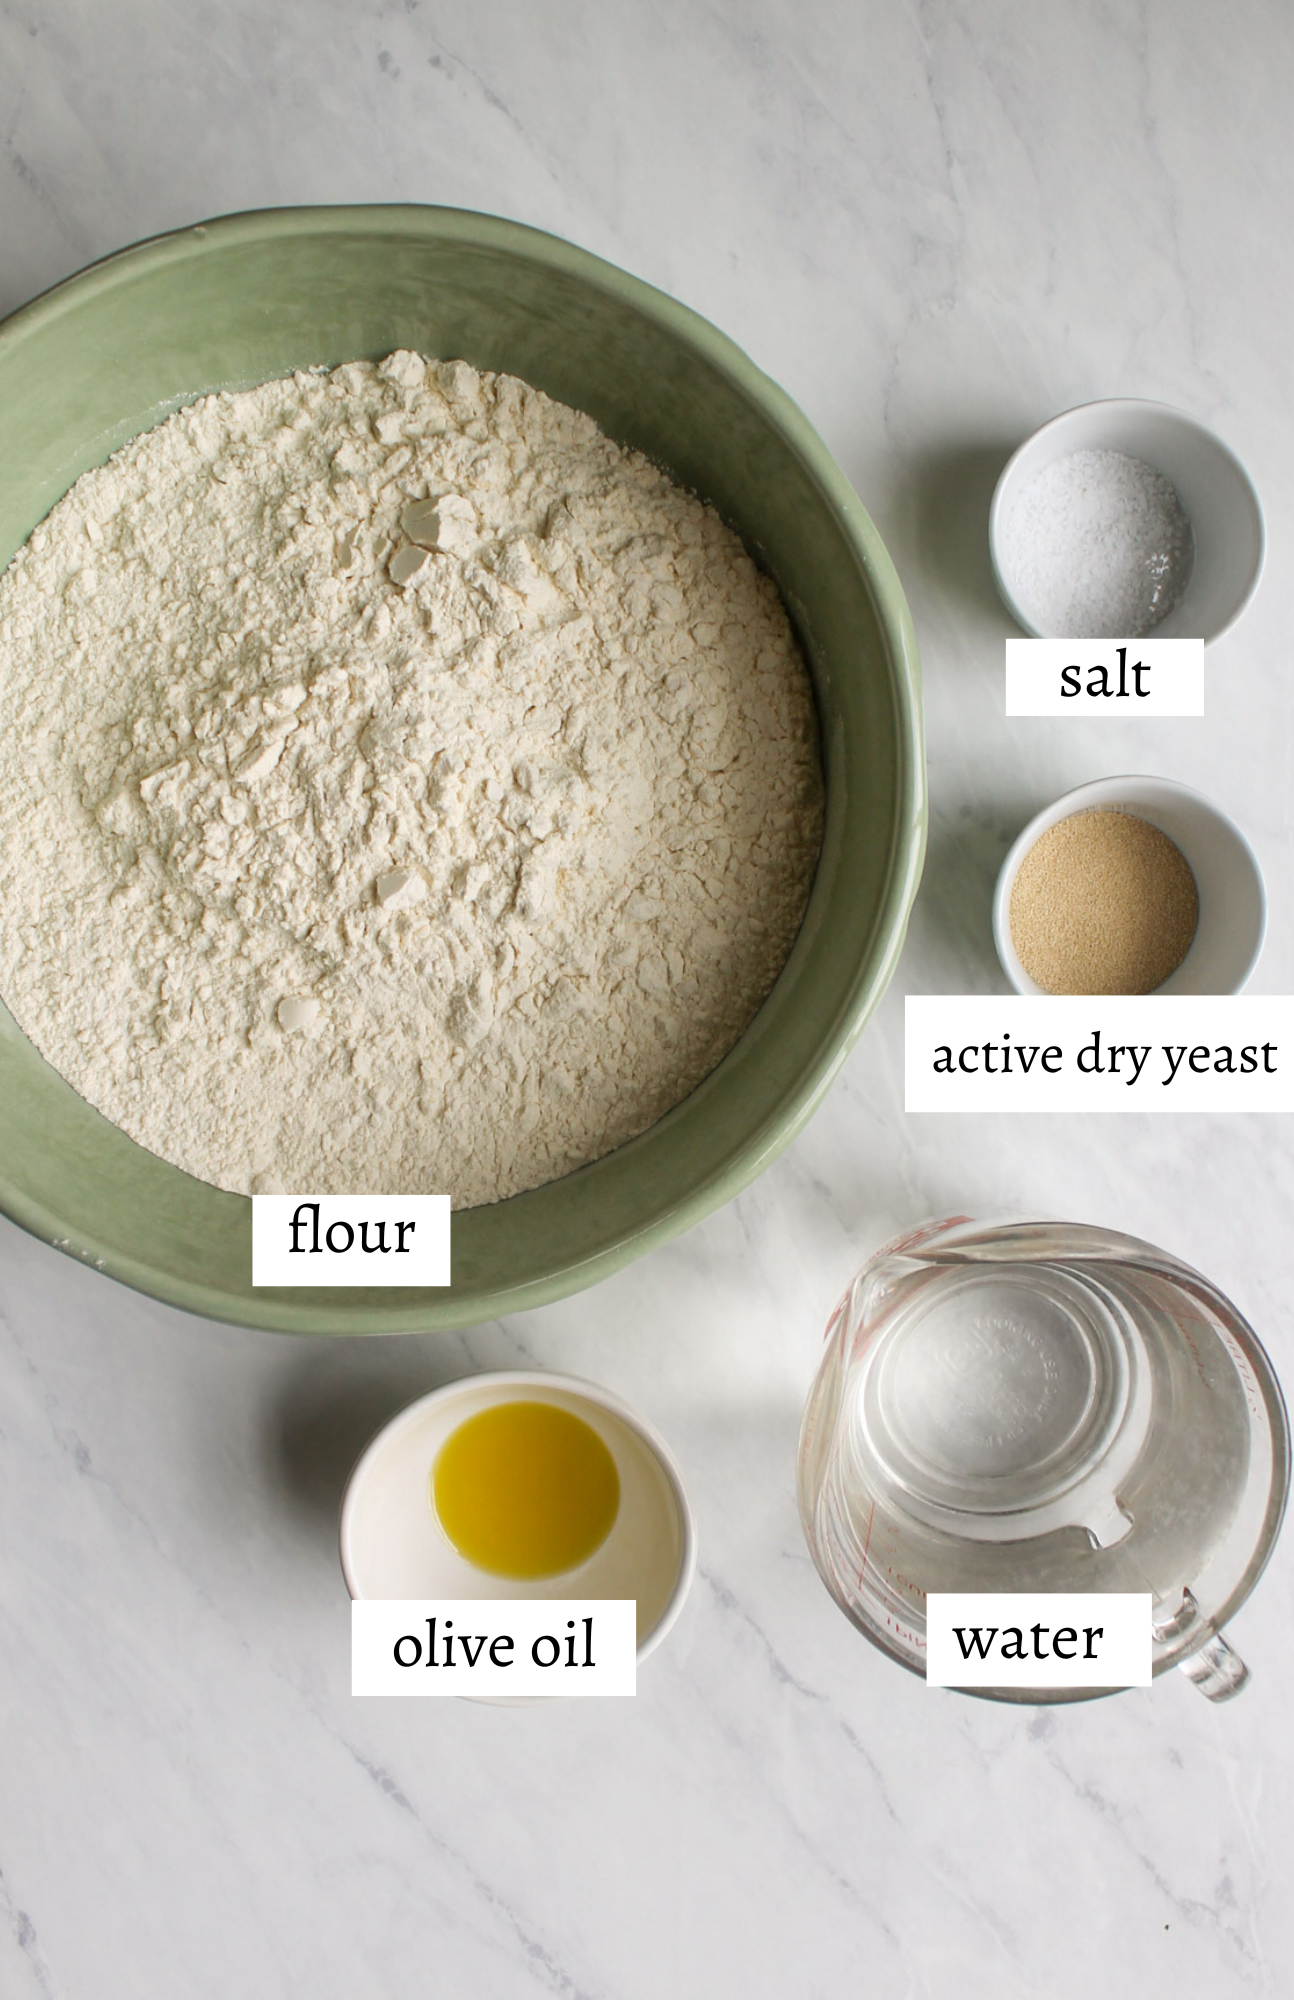 Labeled ingredients for homemade bread.